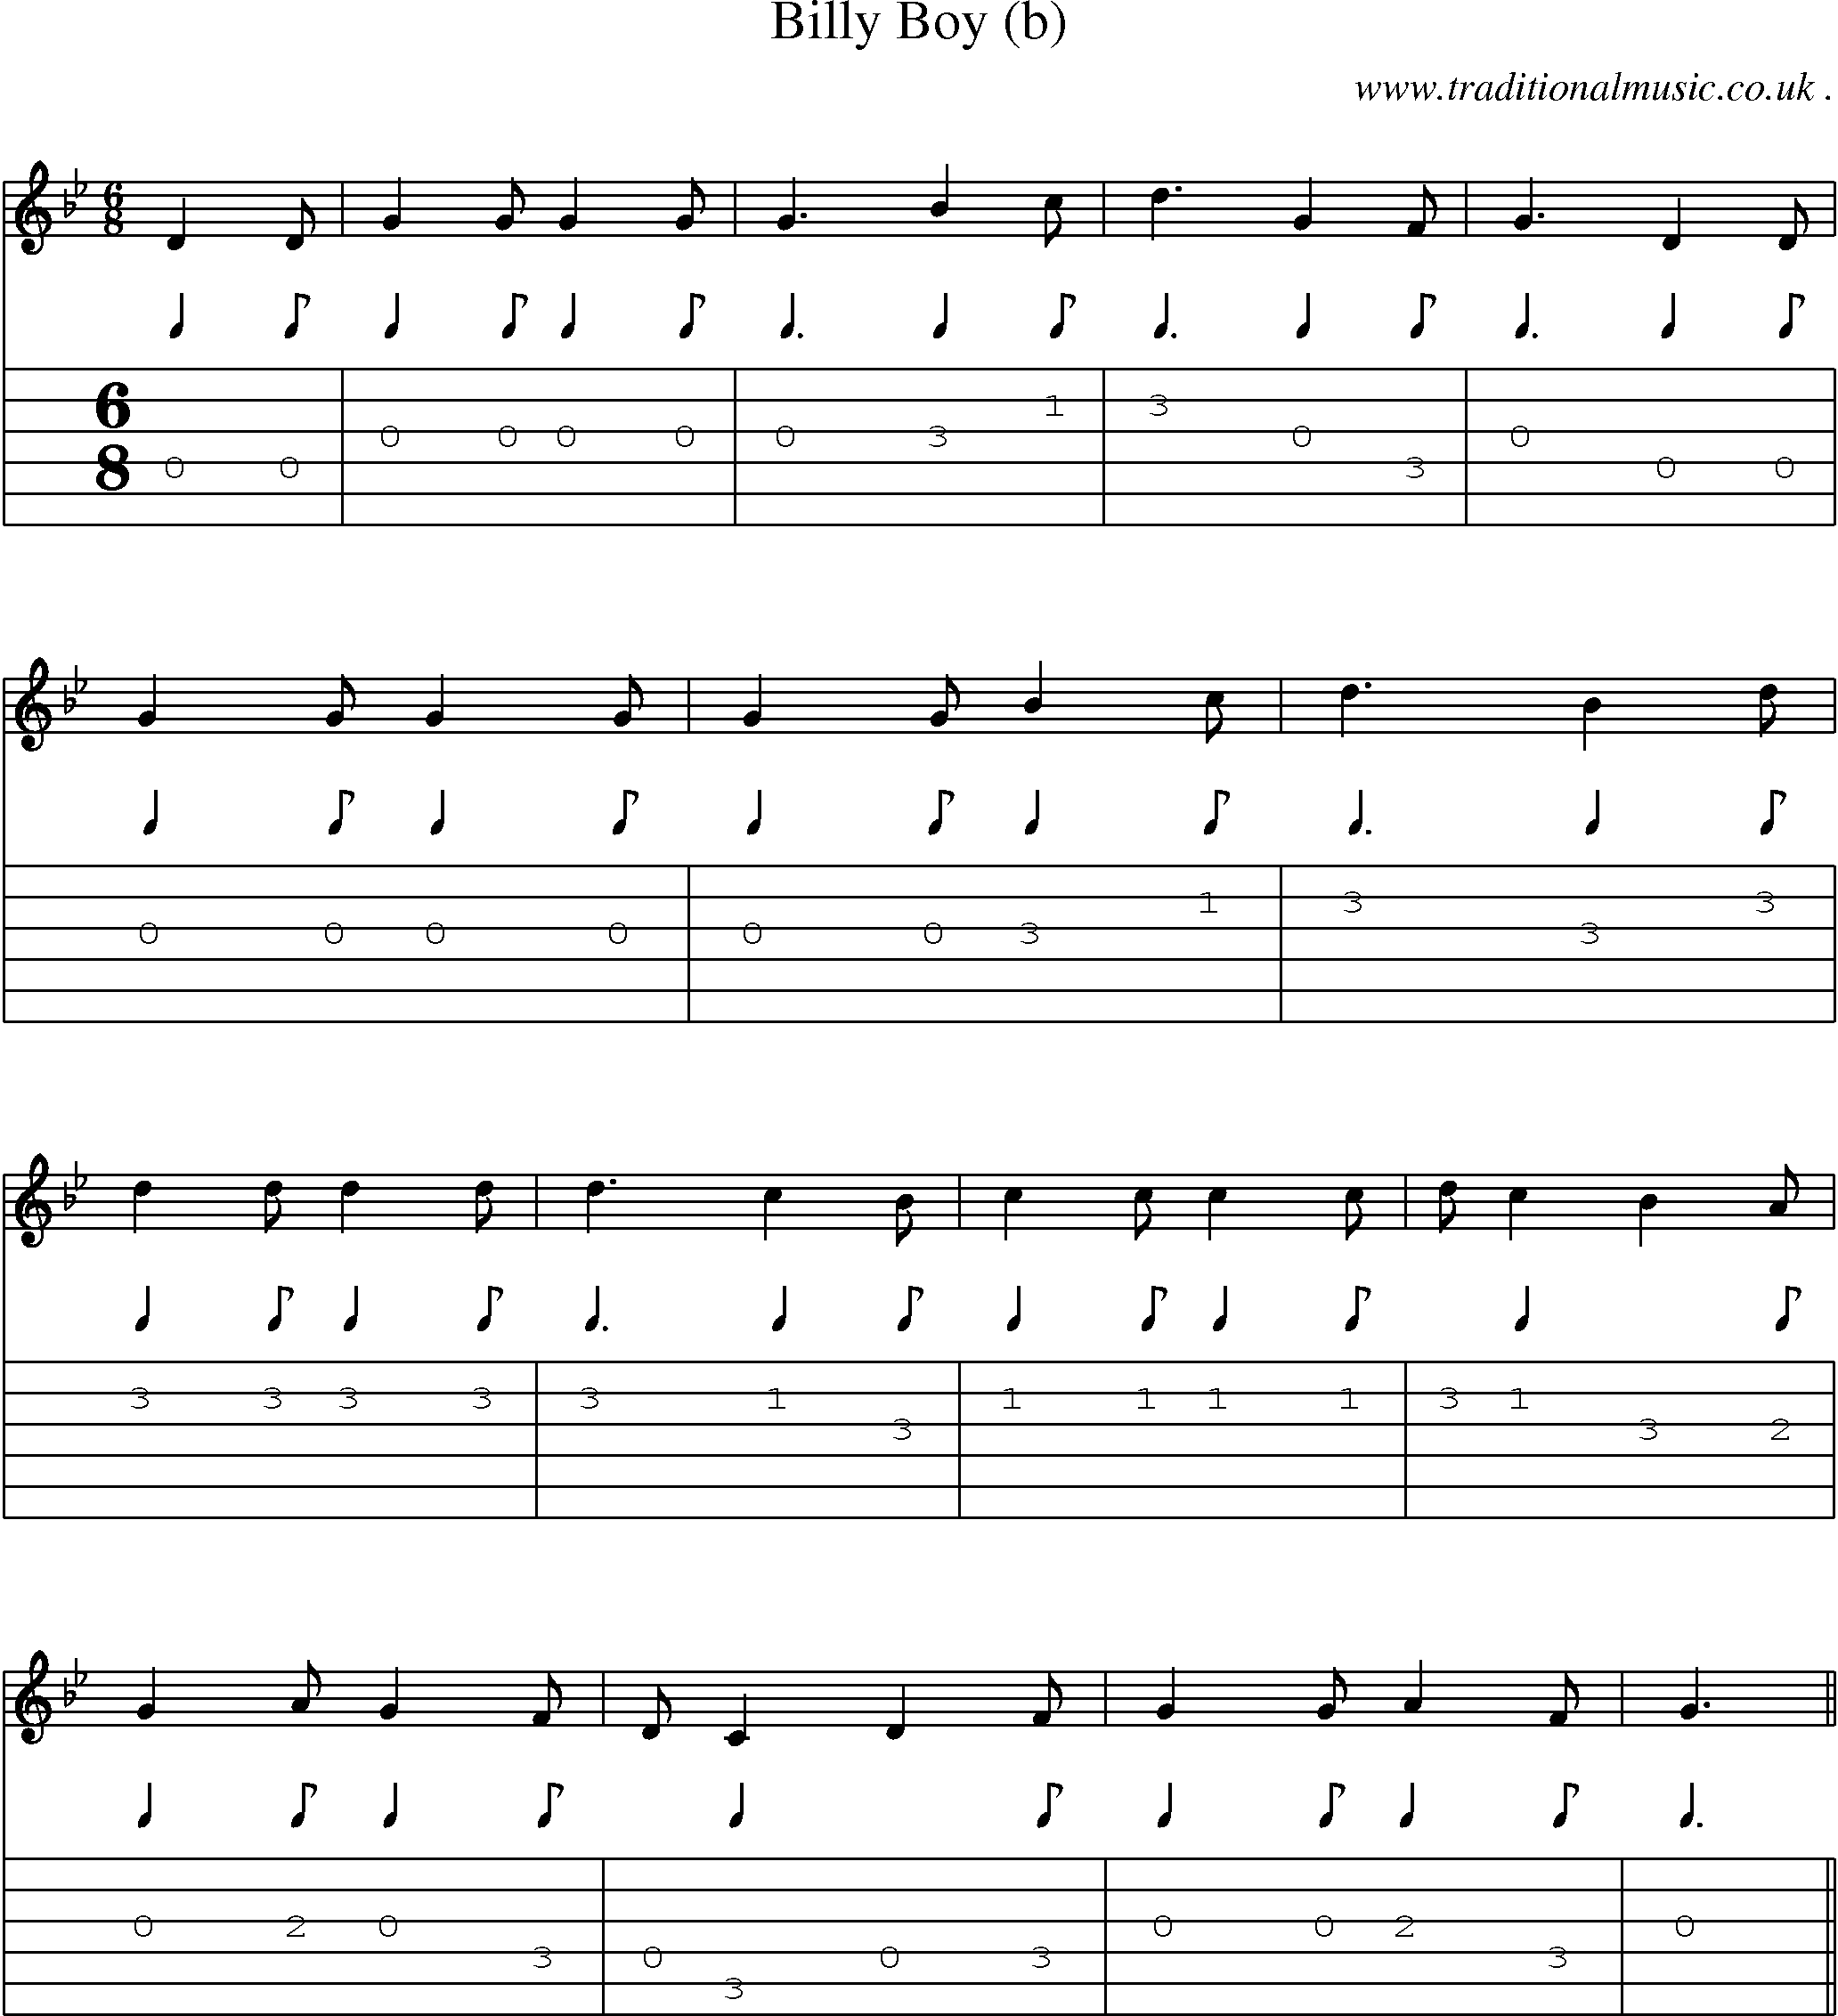 Sheet-Music and Guitar Tabs for Billy Boy (b)